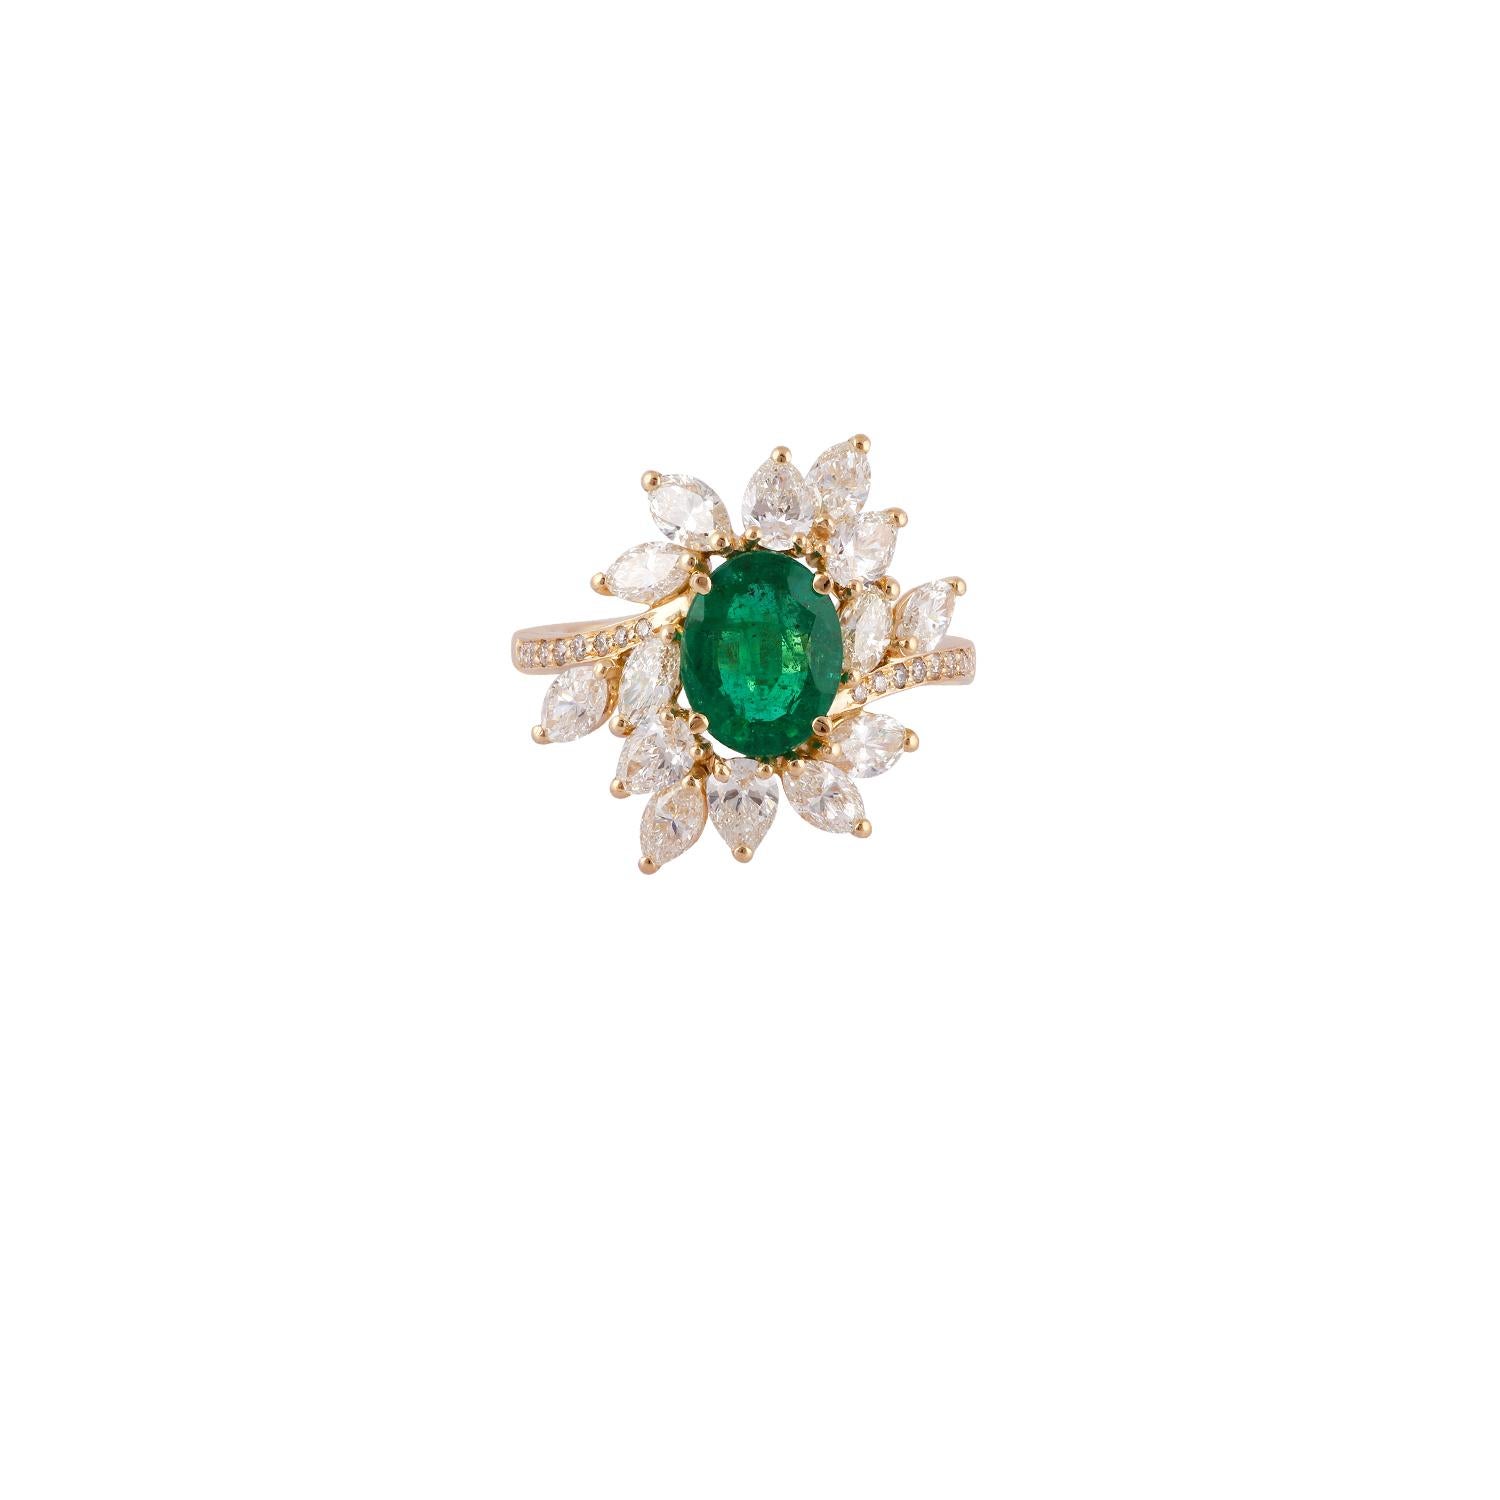 This is an elegant emerald & diamond ring studded in 18k Yellow gold with 1 piece of  Zambian emerald weight 1.48 carat which is surrounded by 30 pieces of  diamonds weight 2.21 carat, this entire ring studded in 18k Yellow gold.


 Ring size can be